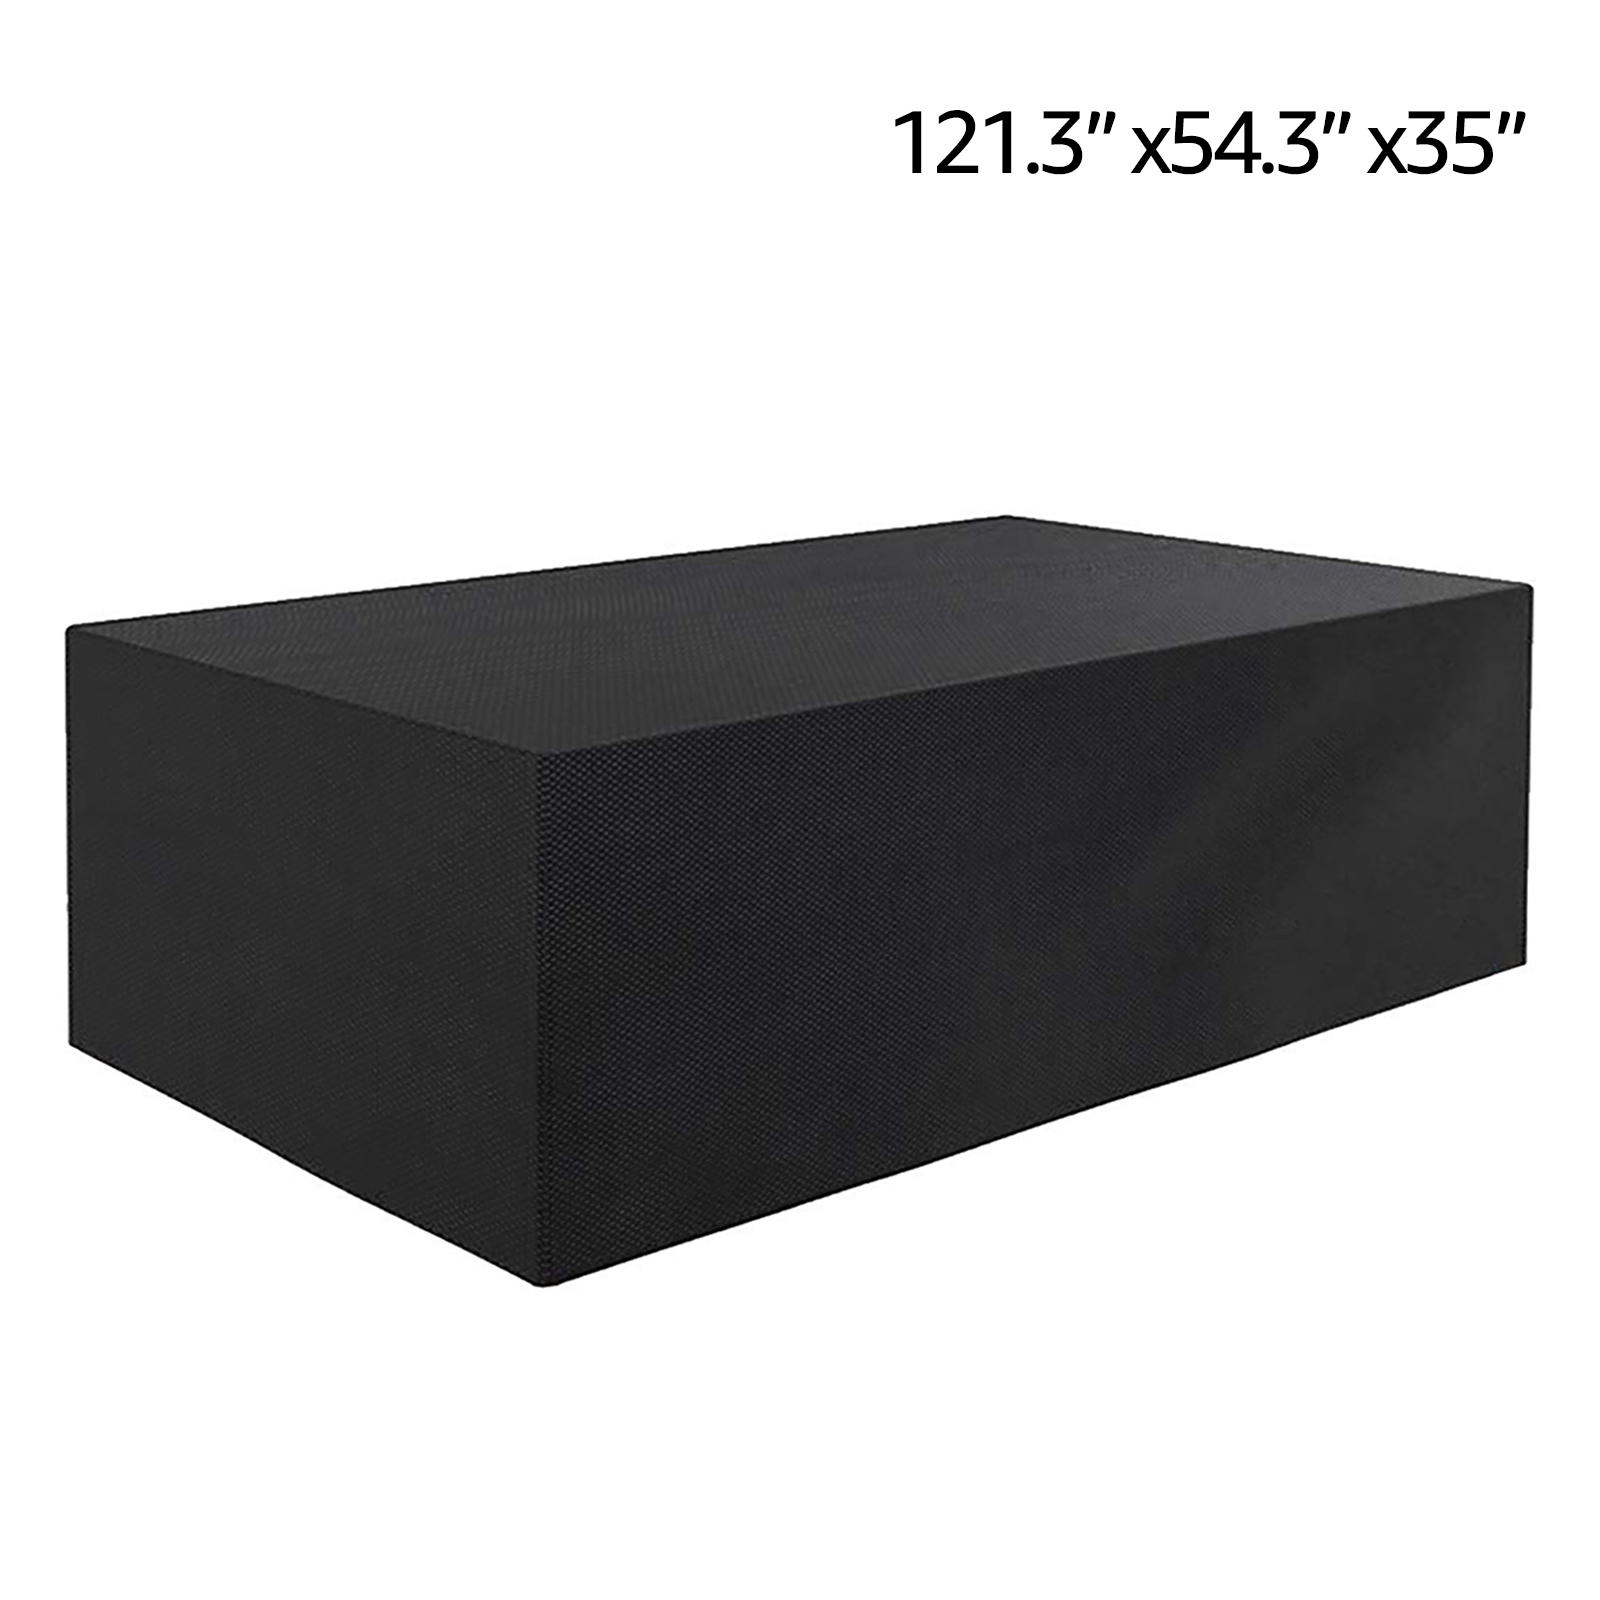 Patio Furniture Cover Set Outdoor Garden Lounge Protector for Sofa Chair Dining Rattan Table Cube Seat 420D Oxford Cloth - image 1 of 8